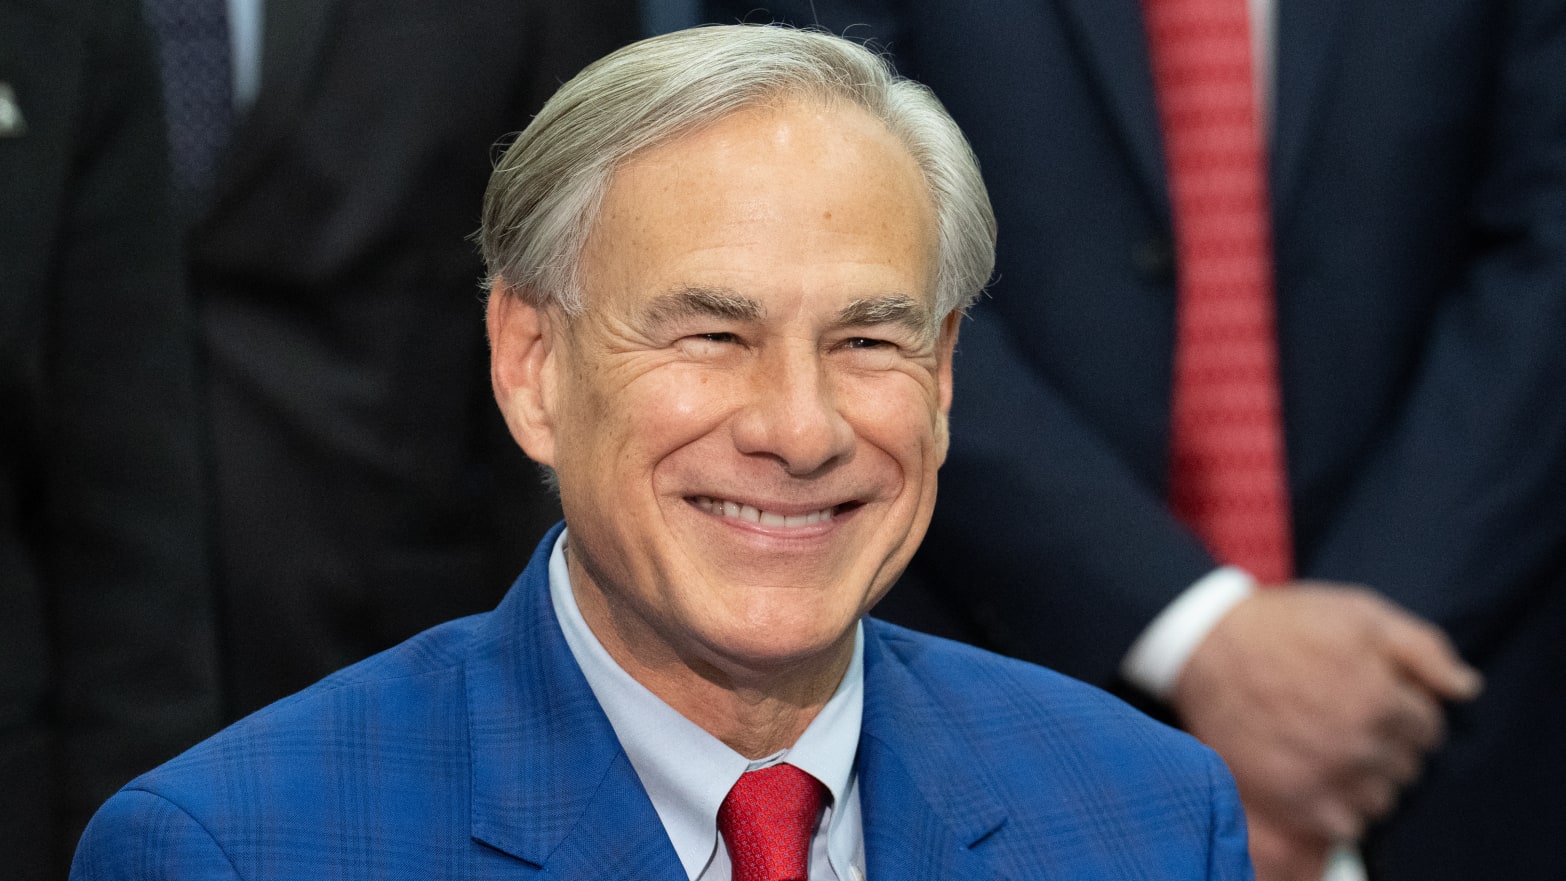 Texas Governor Greg Abbott pardoned a man convicted of shooting and killing a protester at a Black Lives Matter demonstration in 2020.